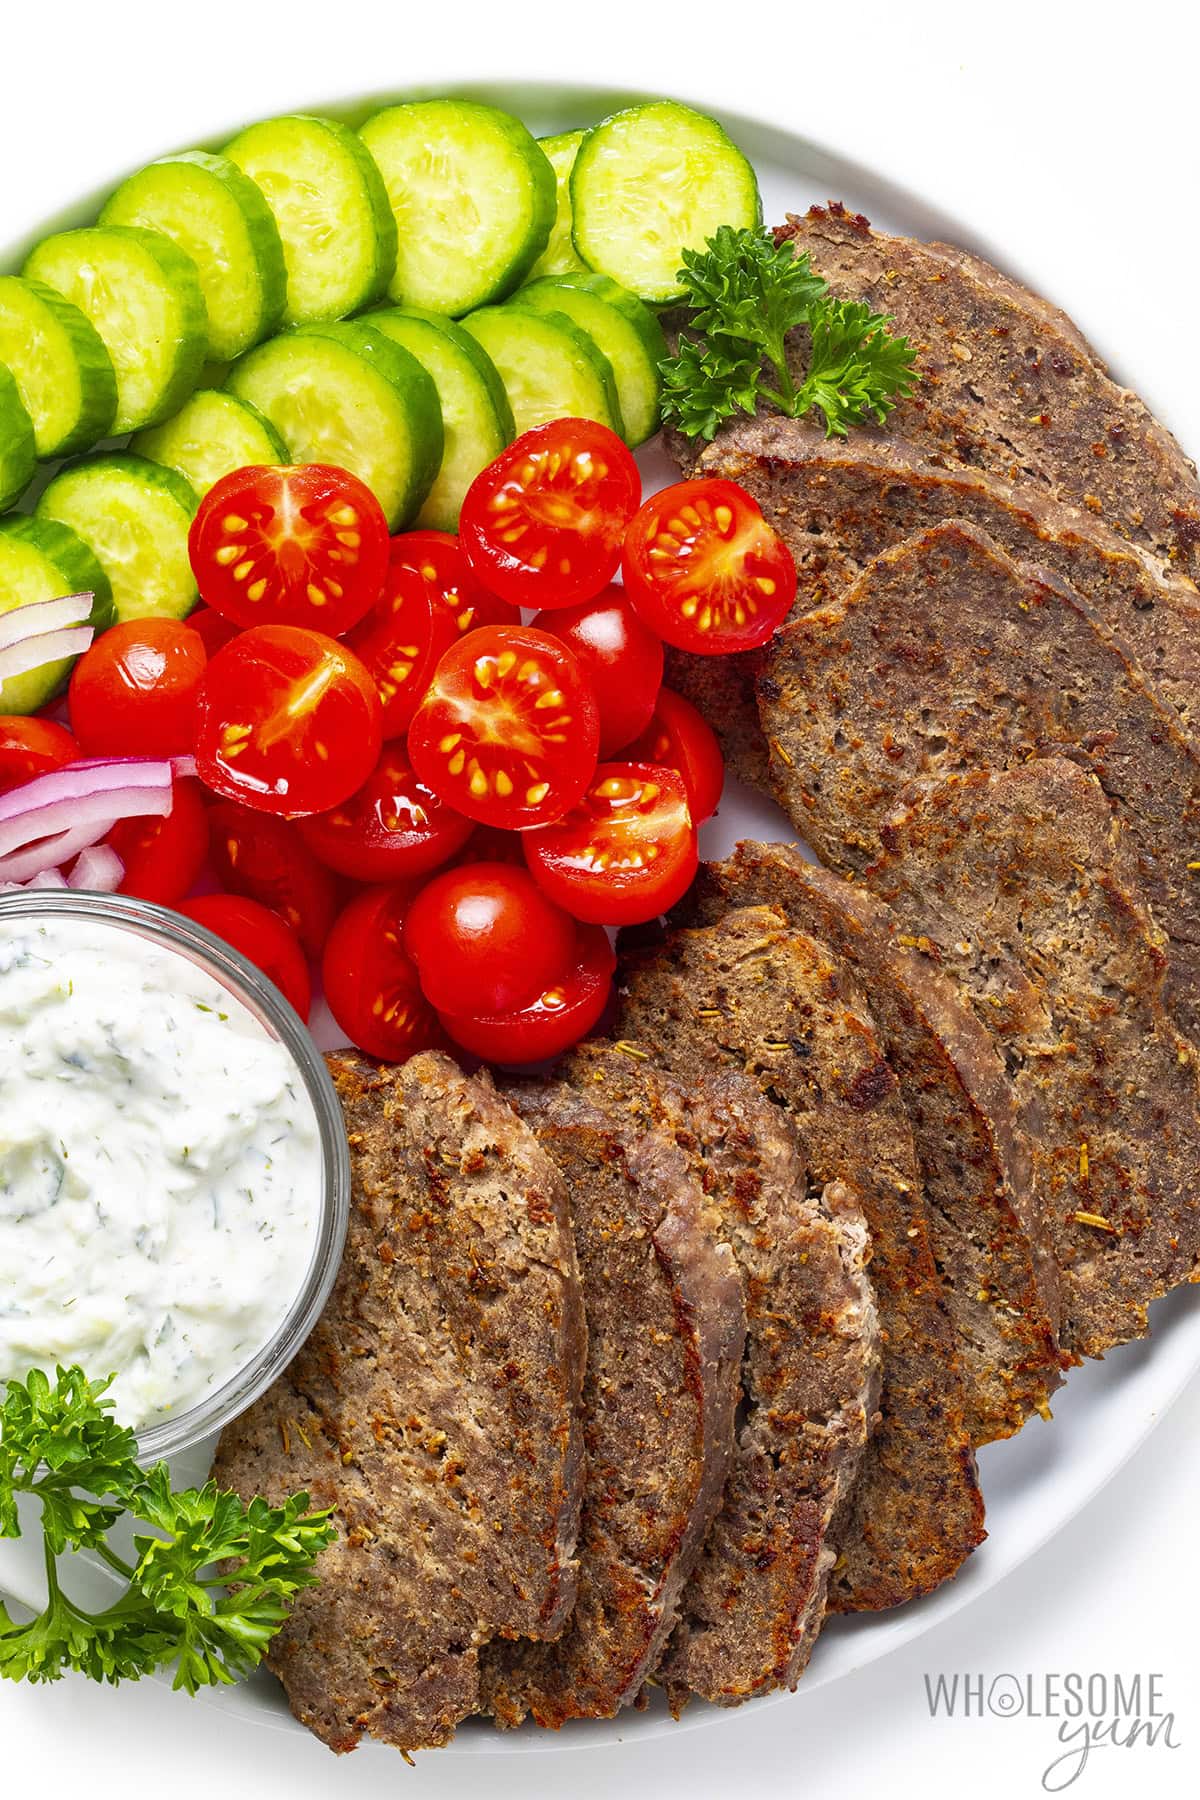 Sliced gyro meat on a platter with veggies and tzatziki sauce.